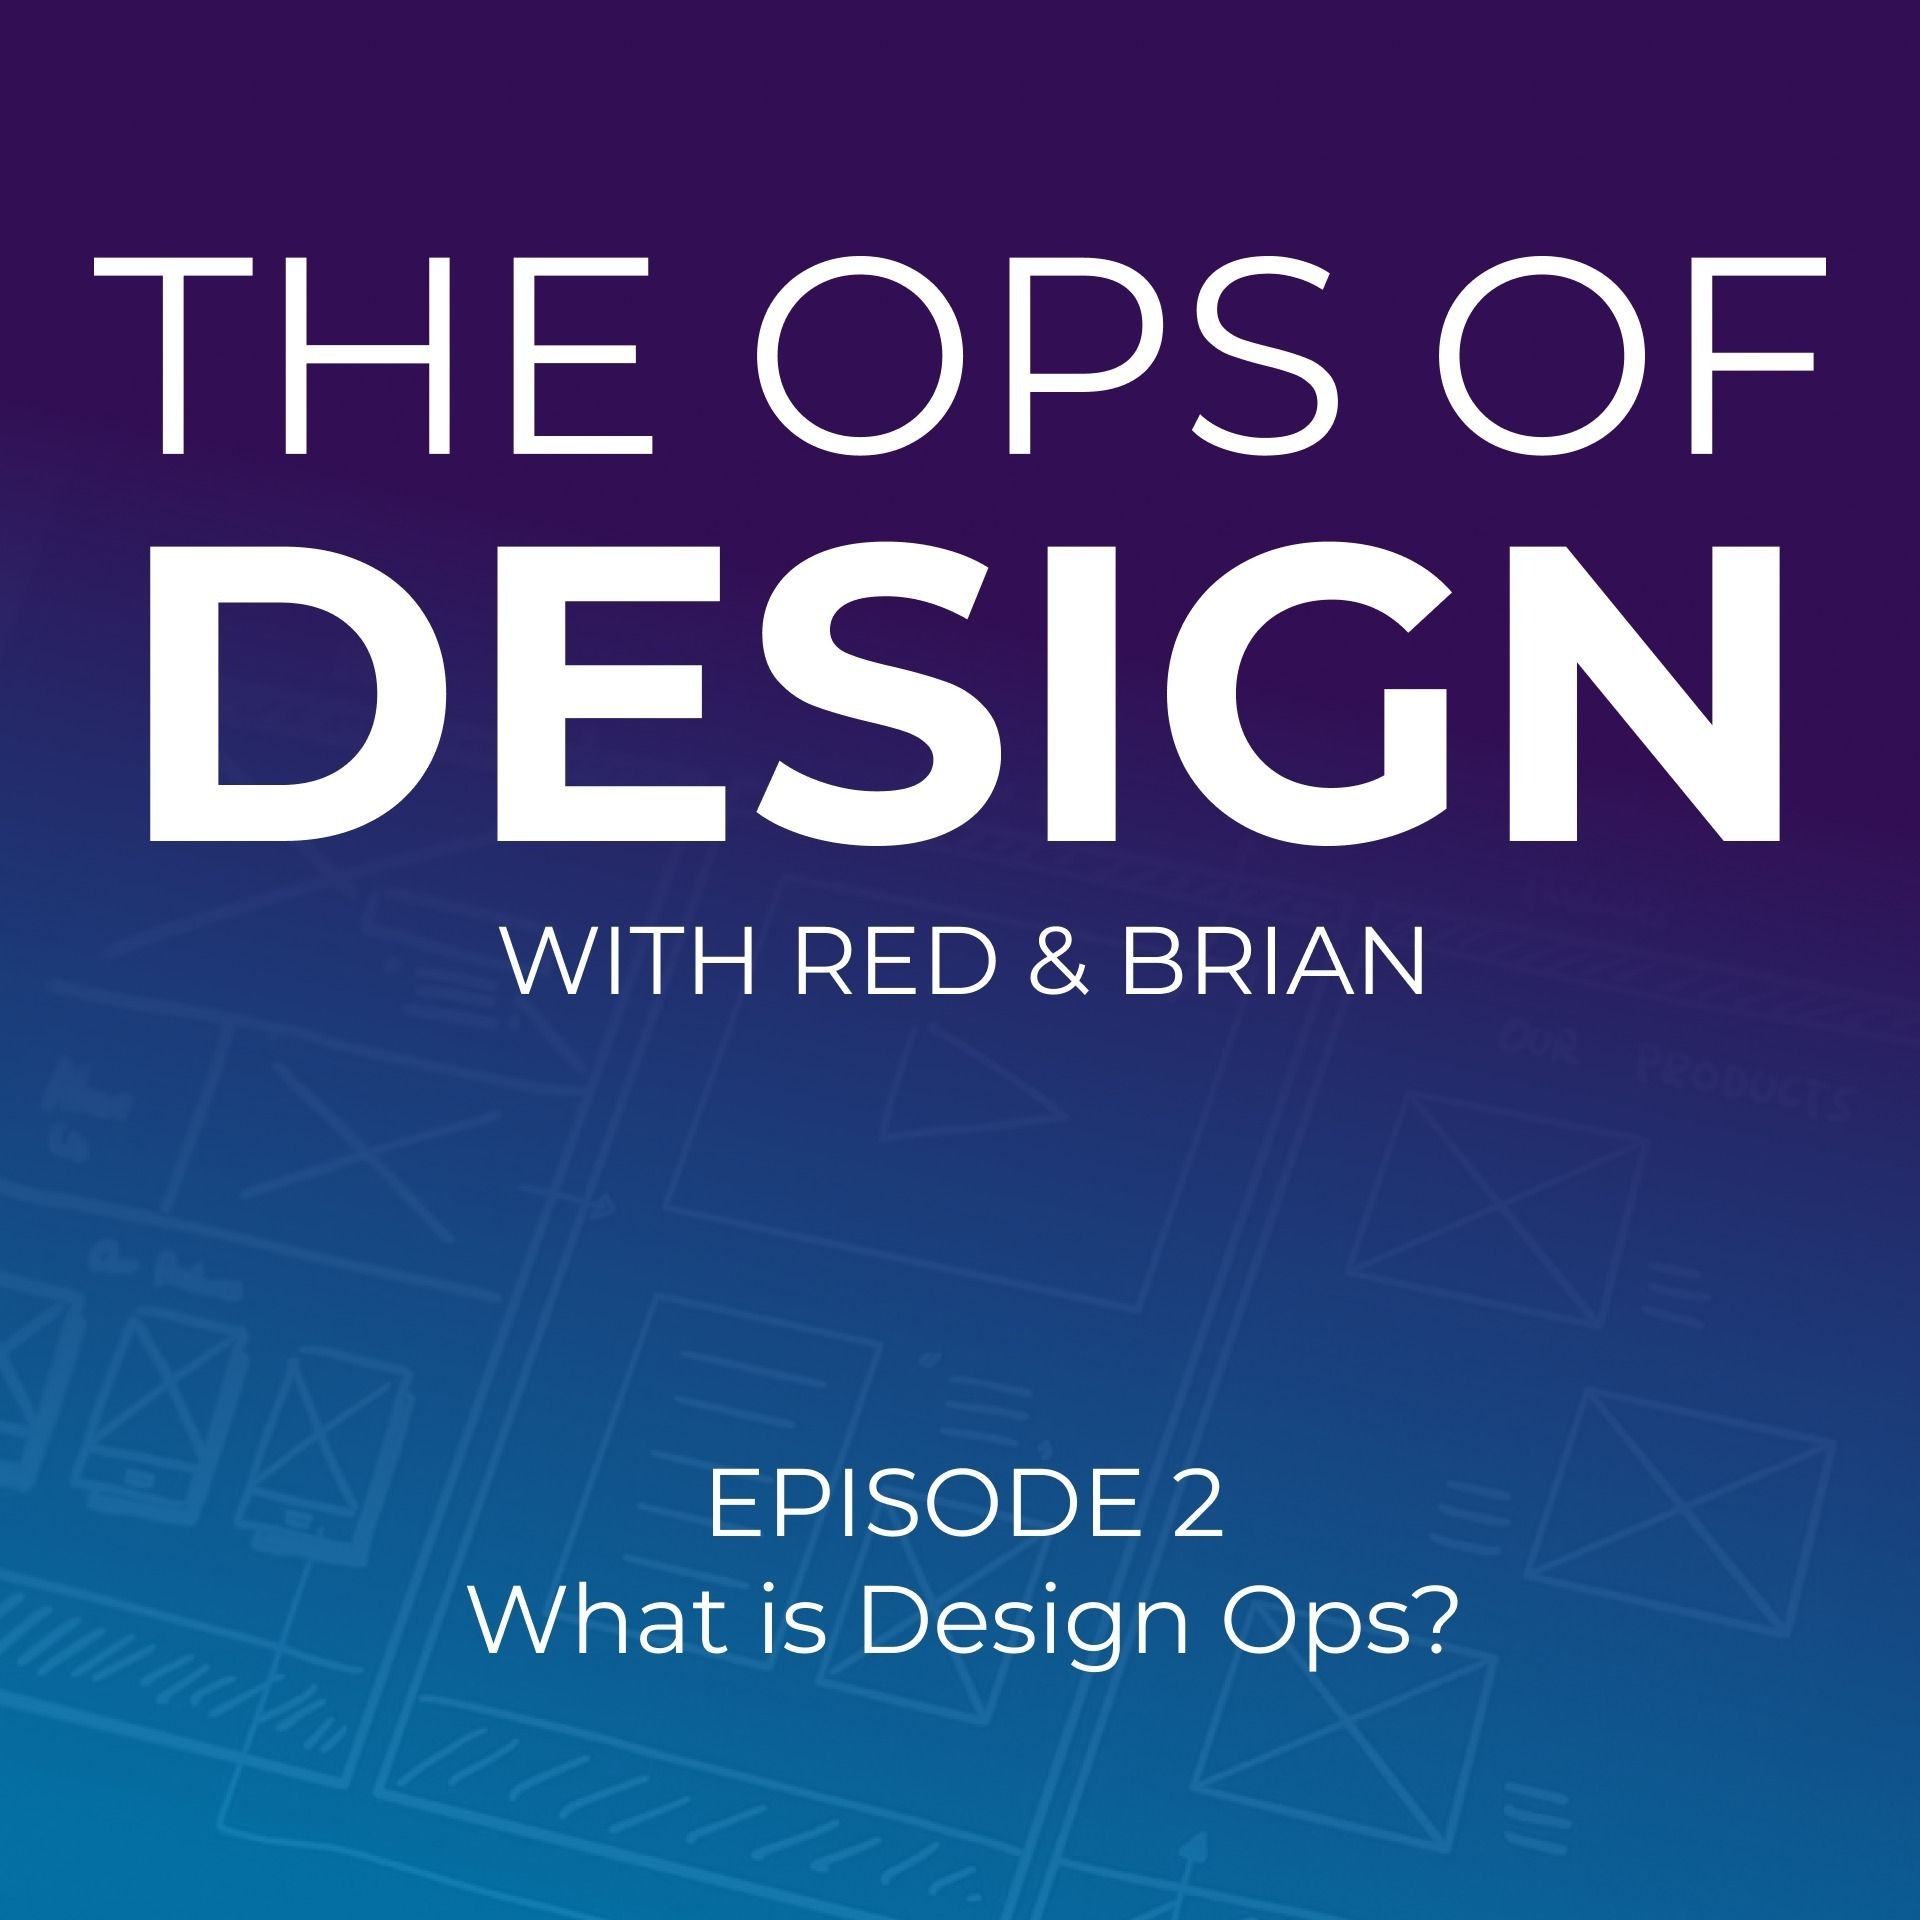 What is Design Ops?